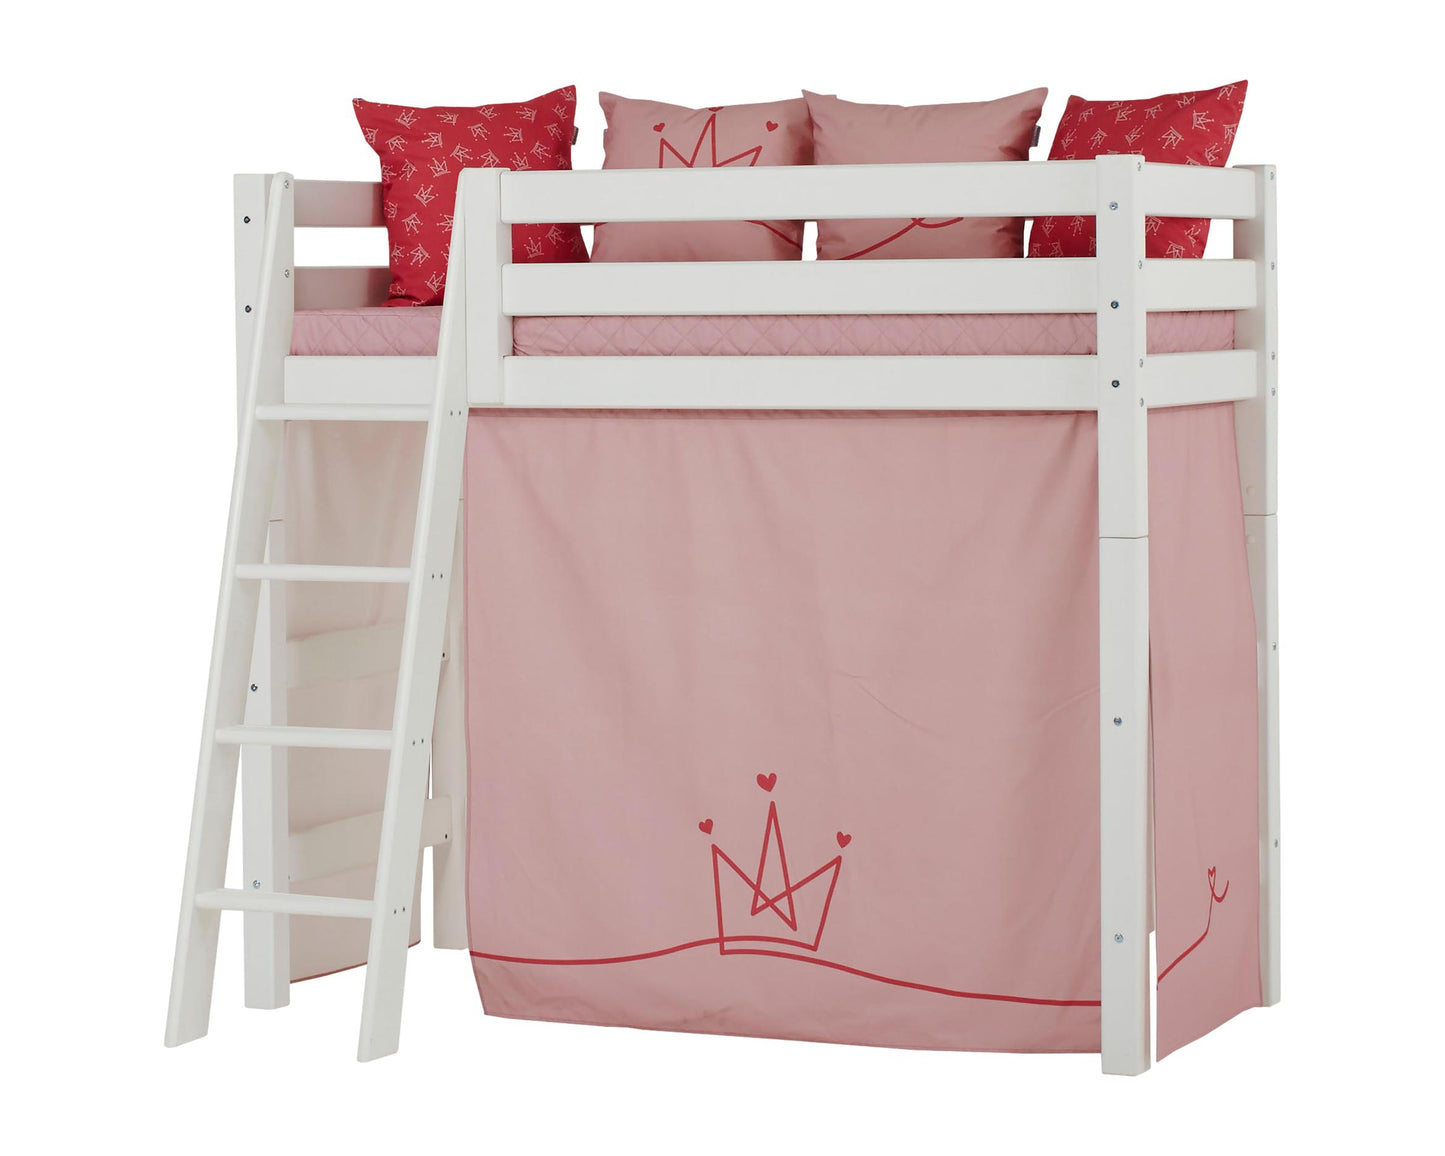 Princess - Curtain for midhigh bed - 70x160 cm